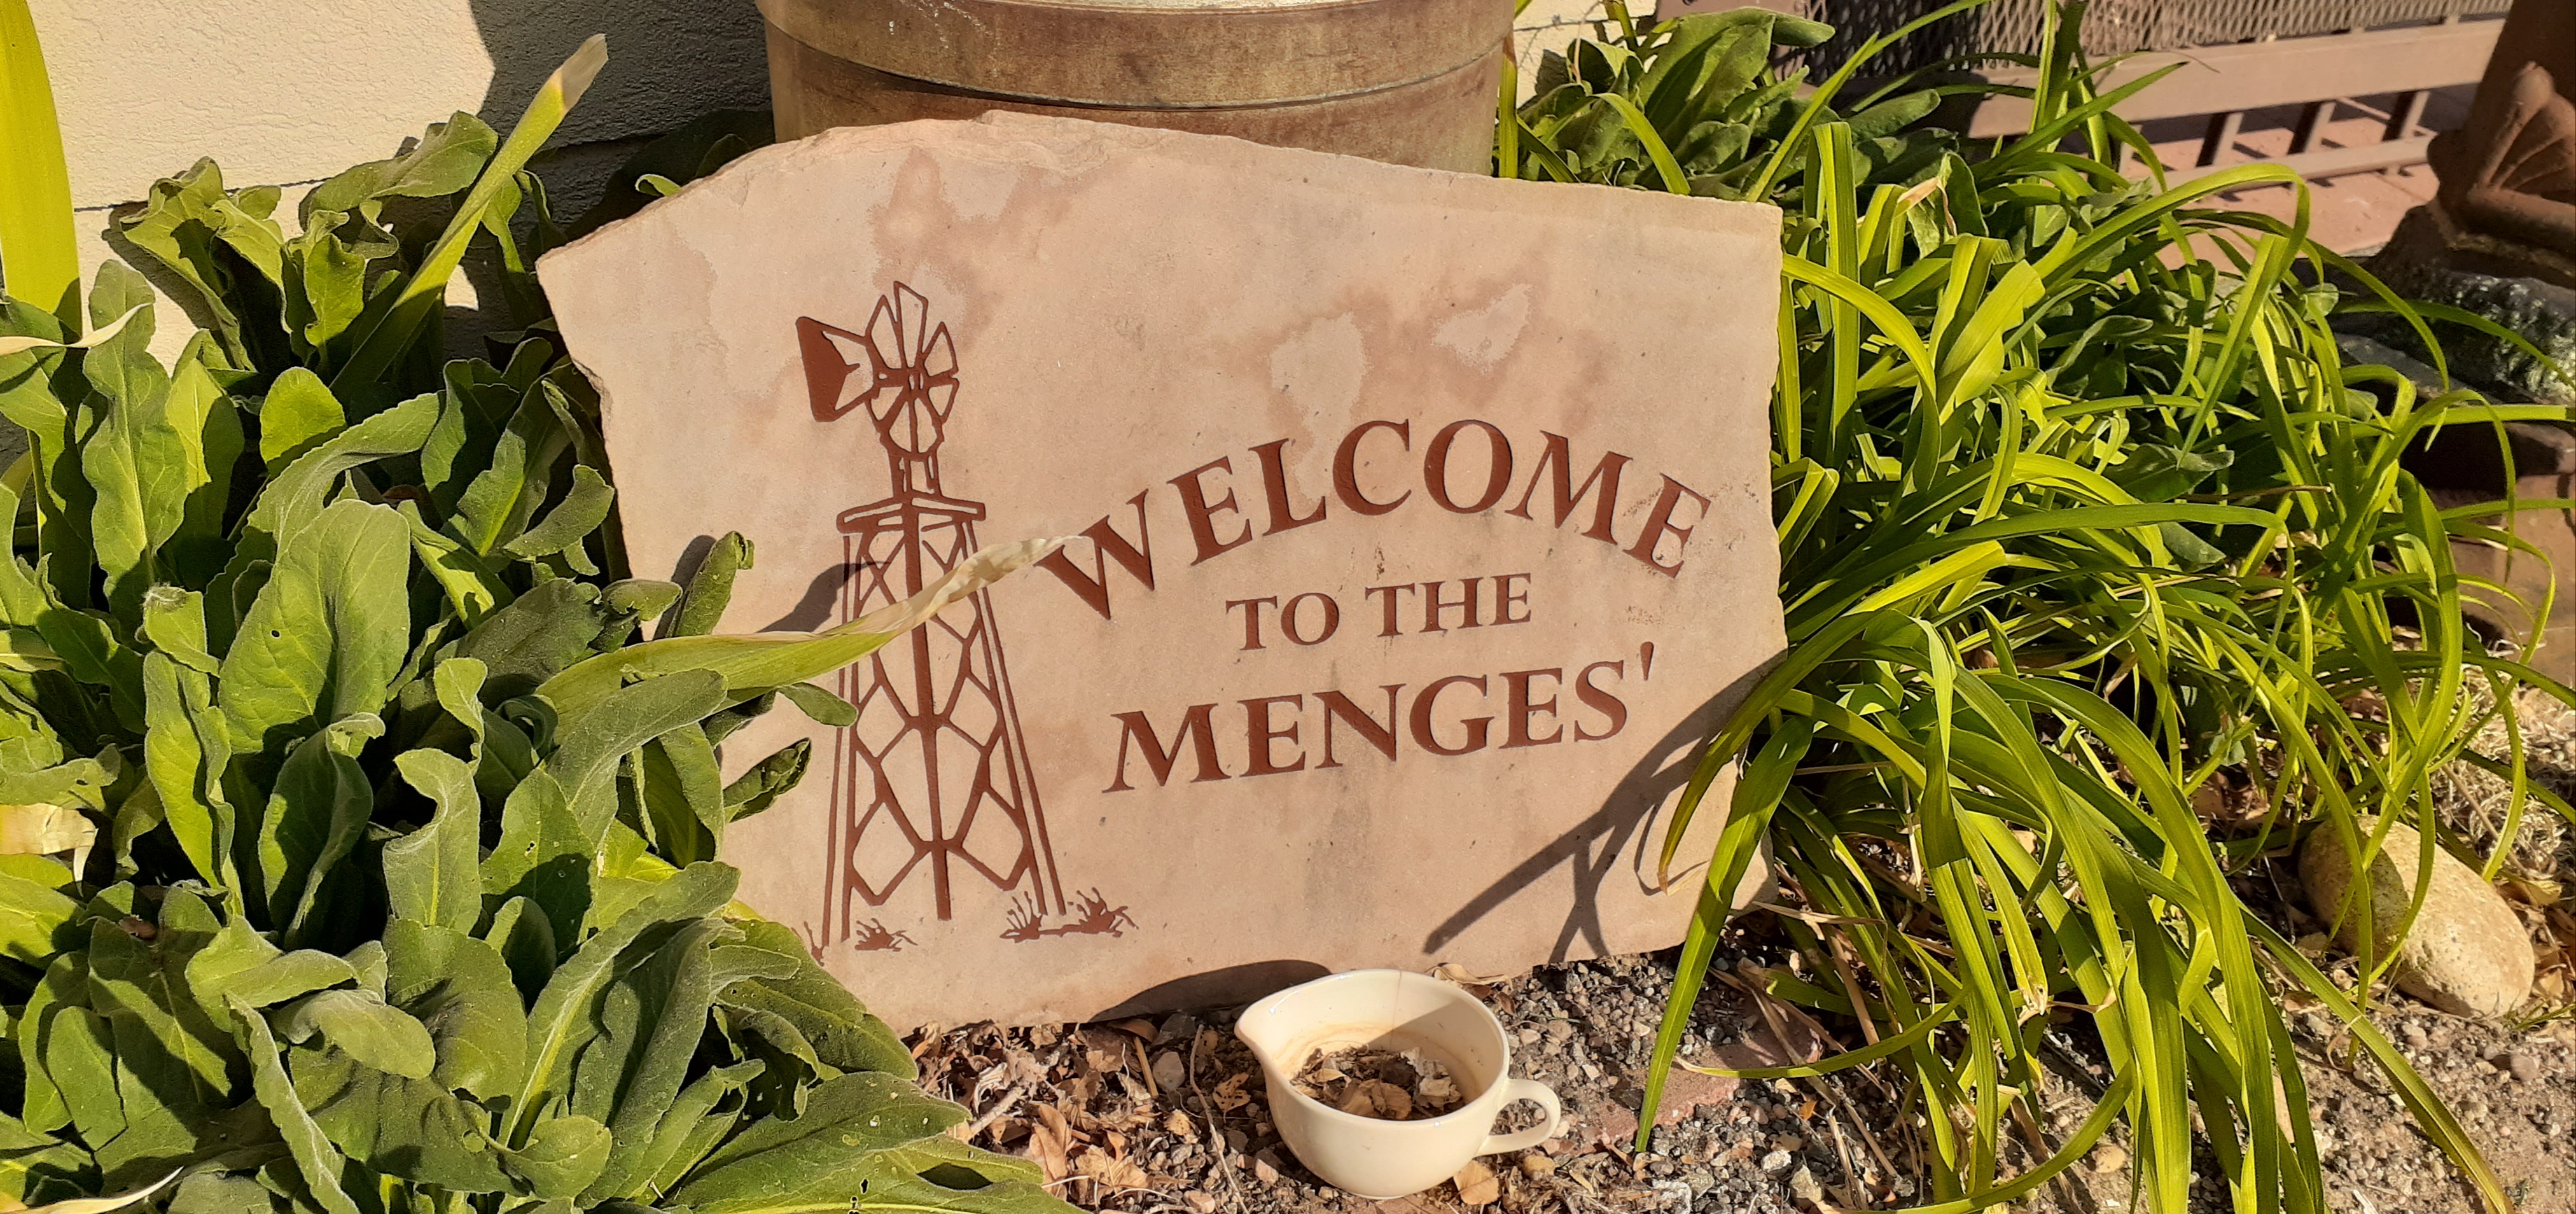 Menges Welcome seconews.org 